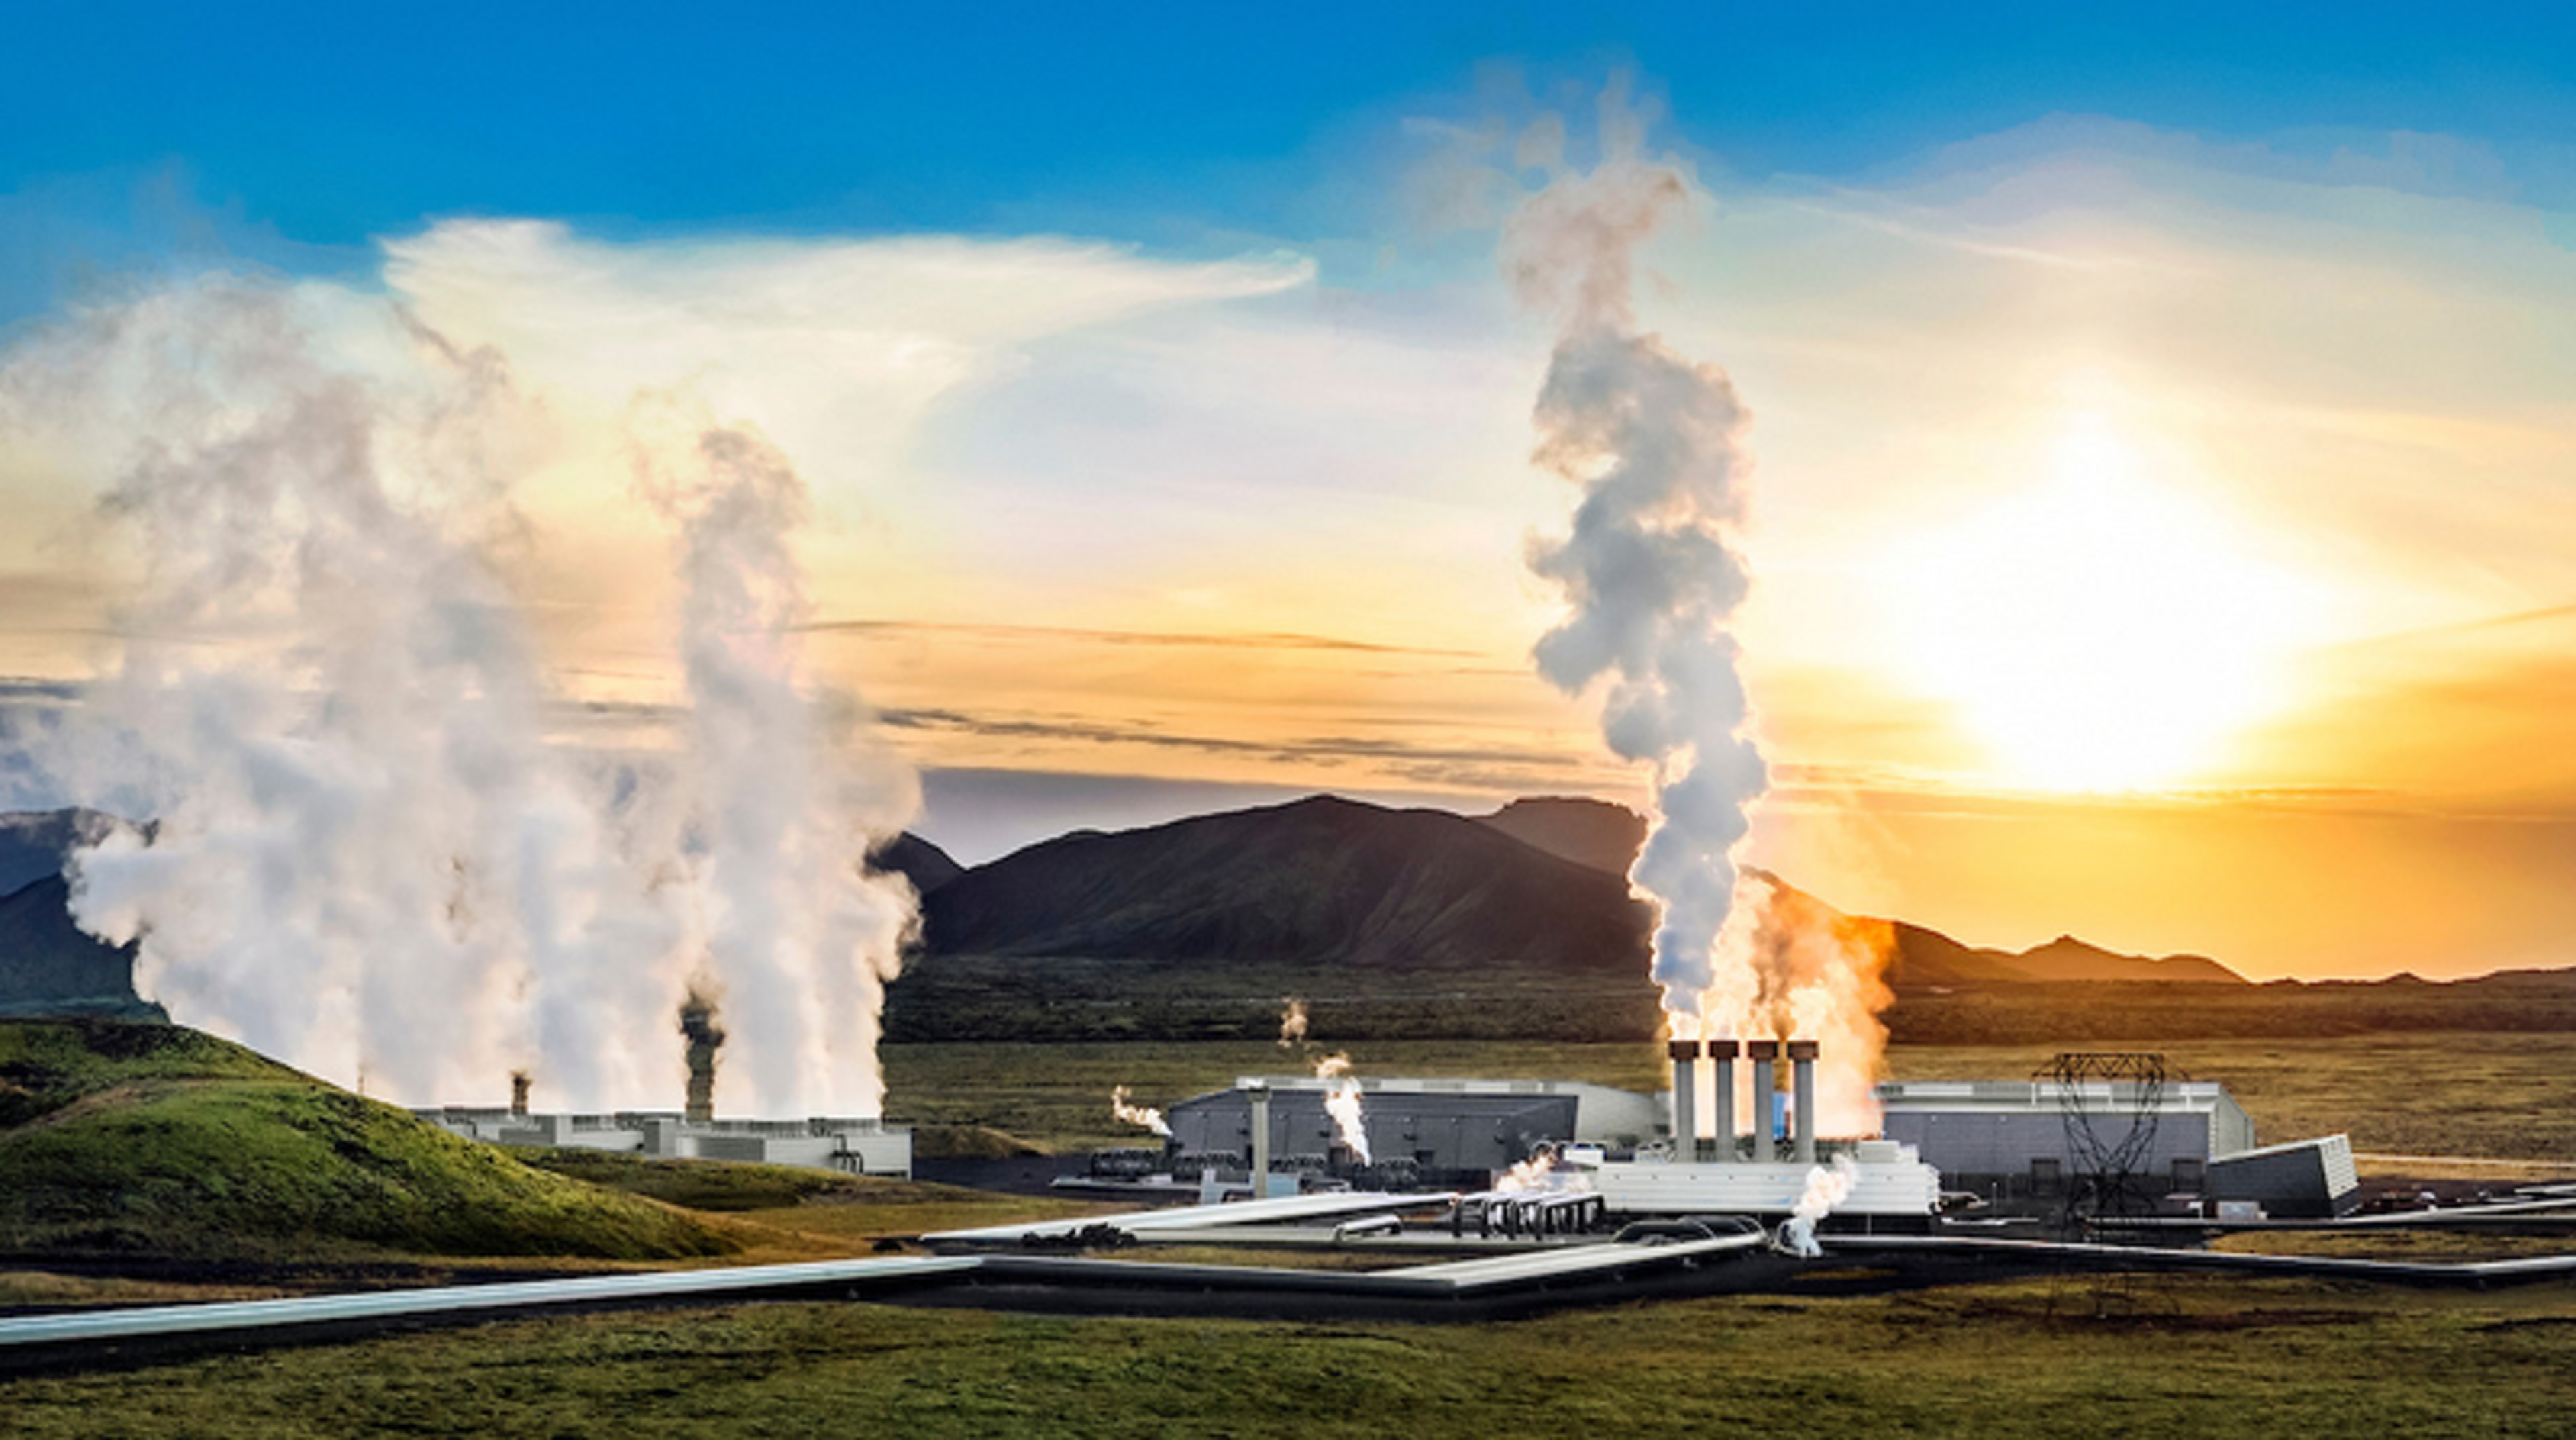 Sunset view of the Hellisheiði Power Plant in Iceland, featuring multiple steam columns rising against a vibrant sky, with the rugged landscape of volcanic hills in the background.